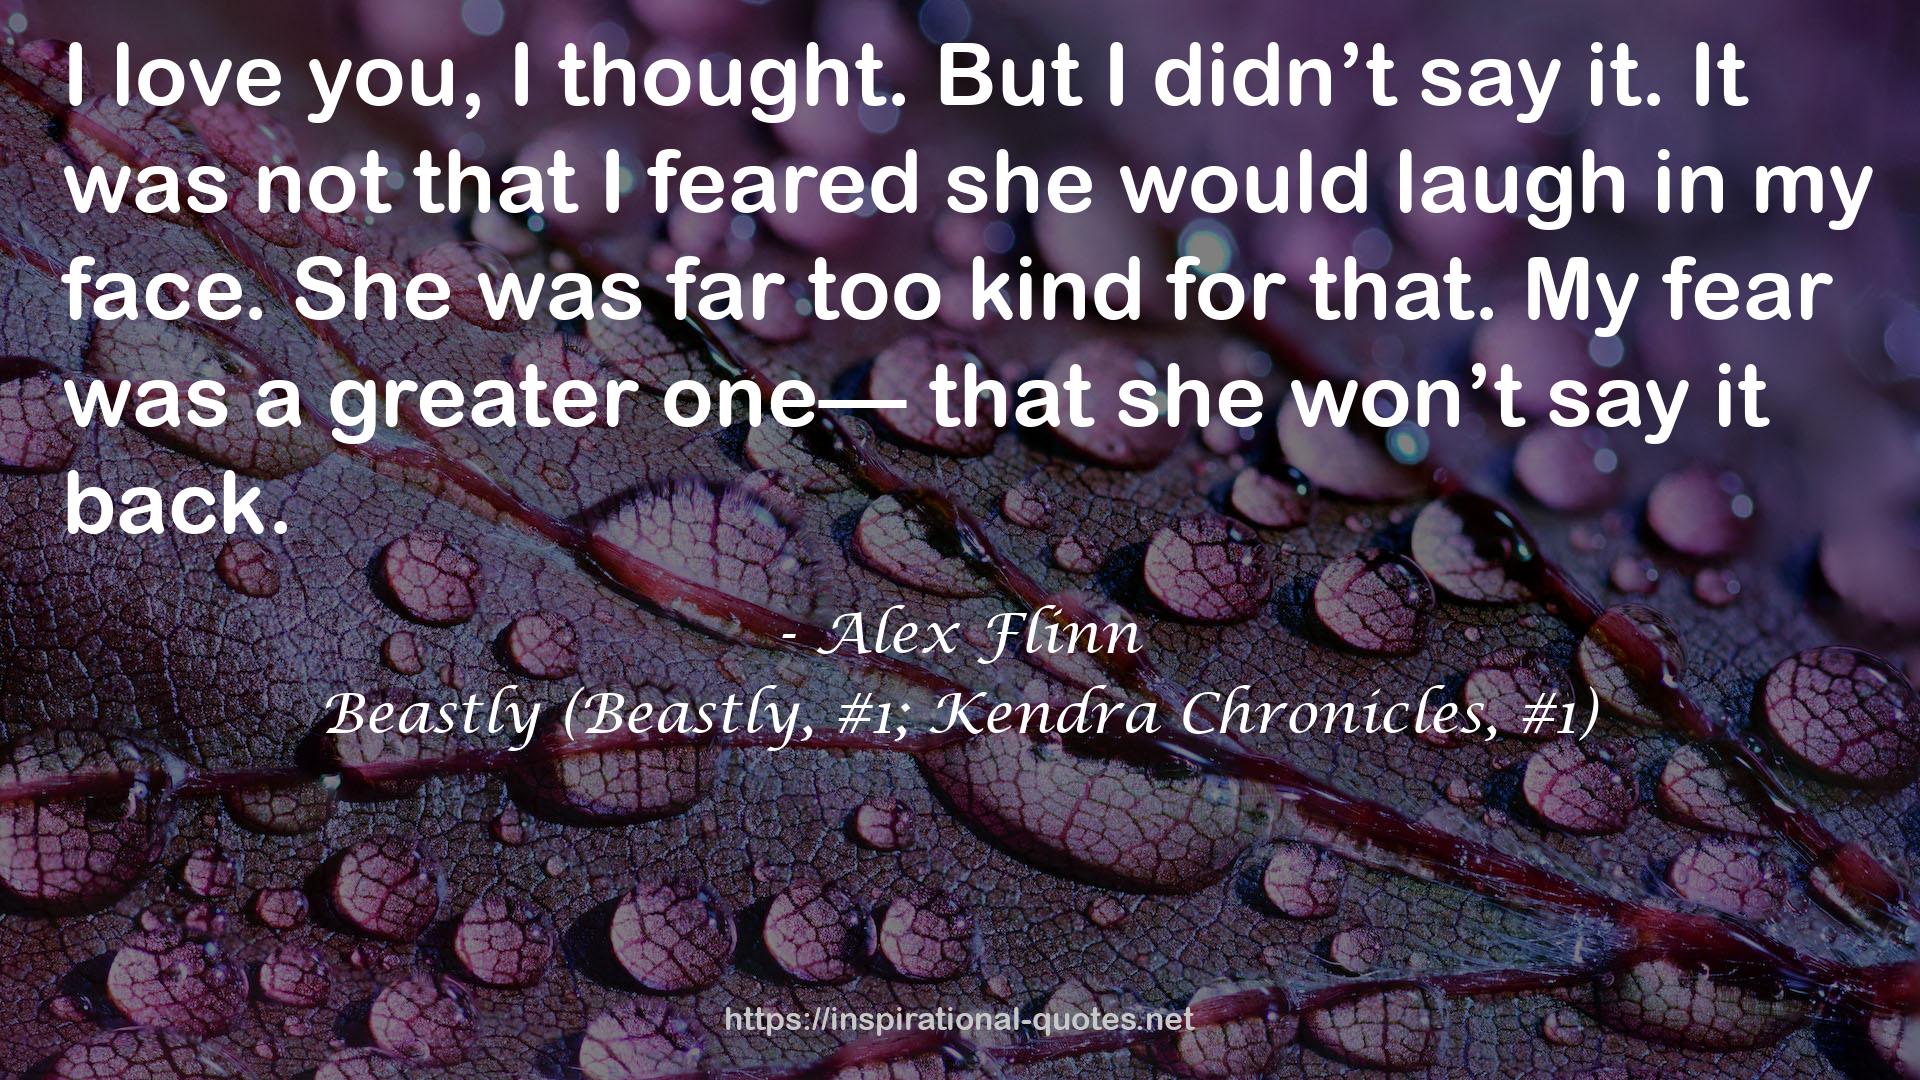 Beastly (Beastly, #1; Kendra Chronicles, #1) QUOTES